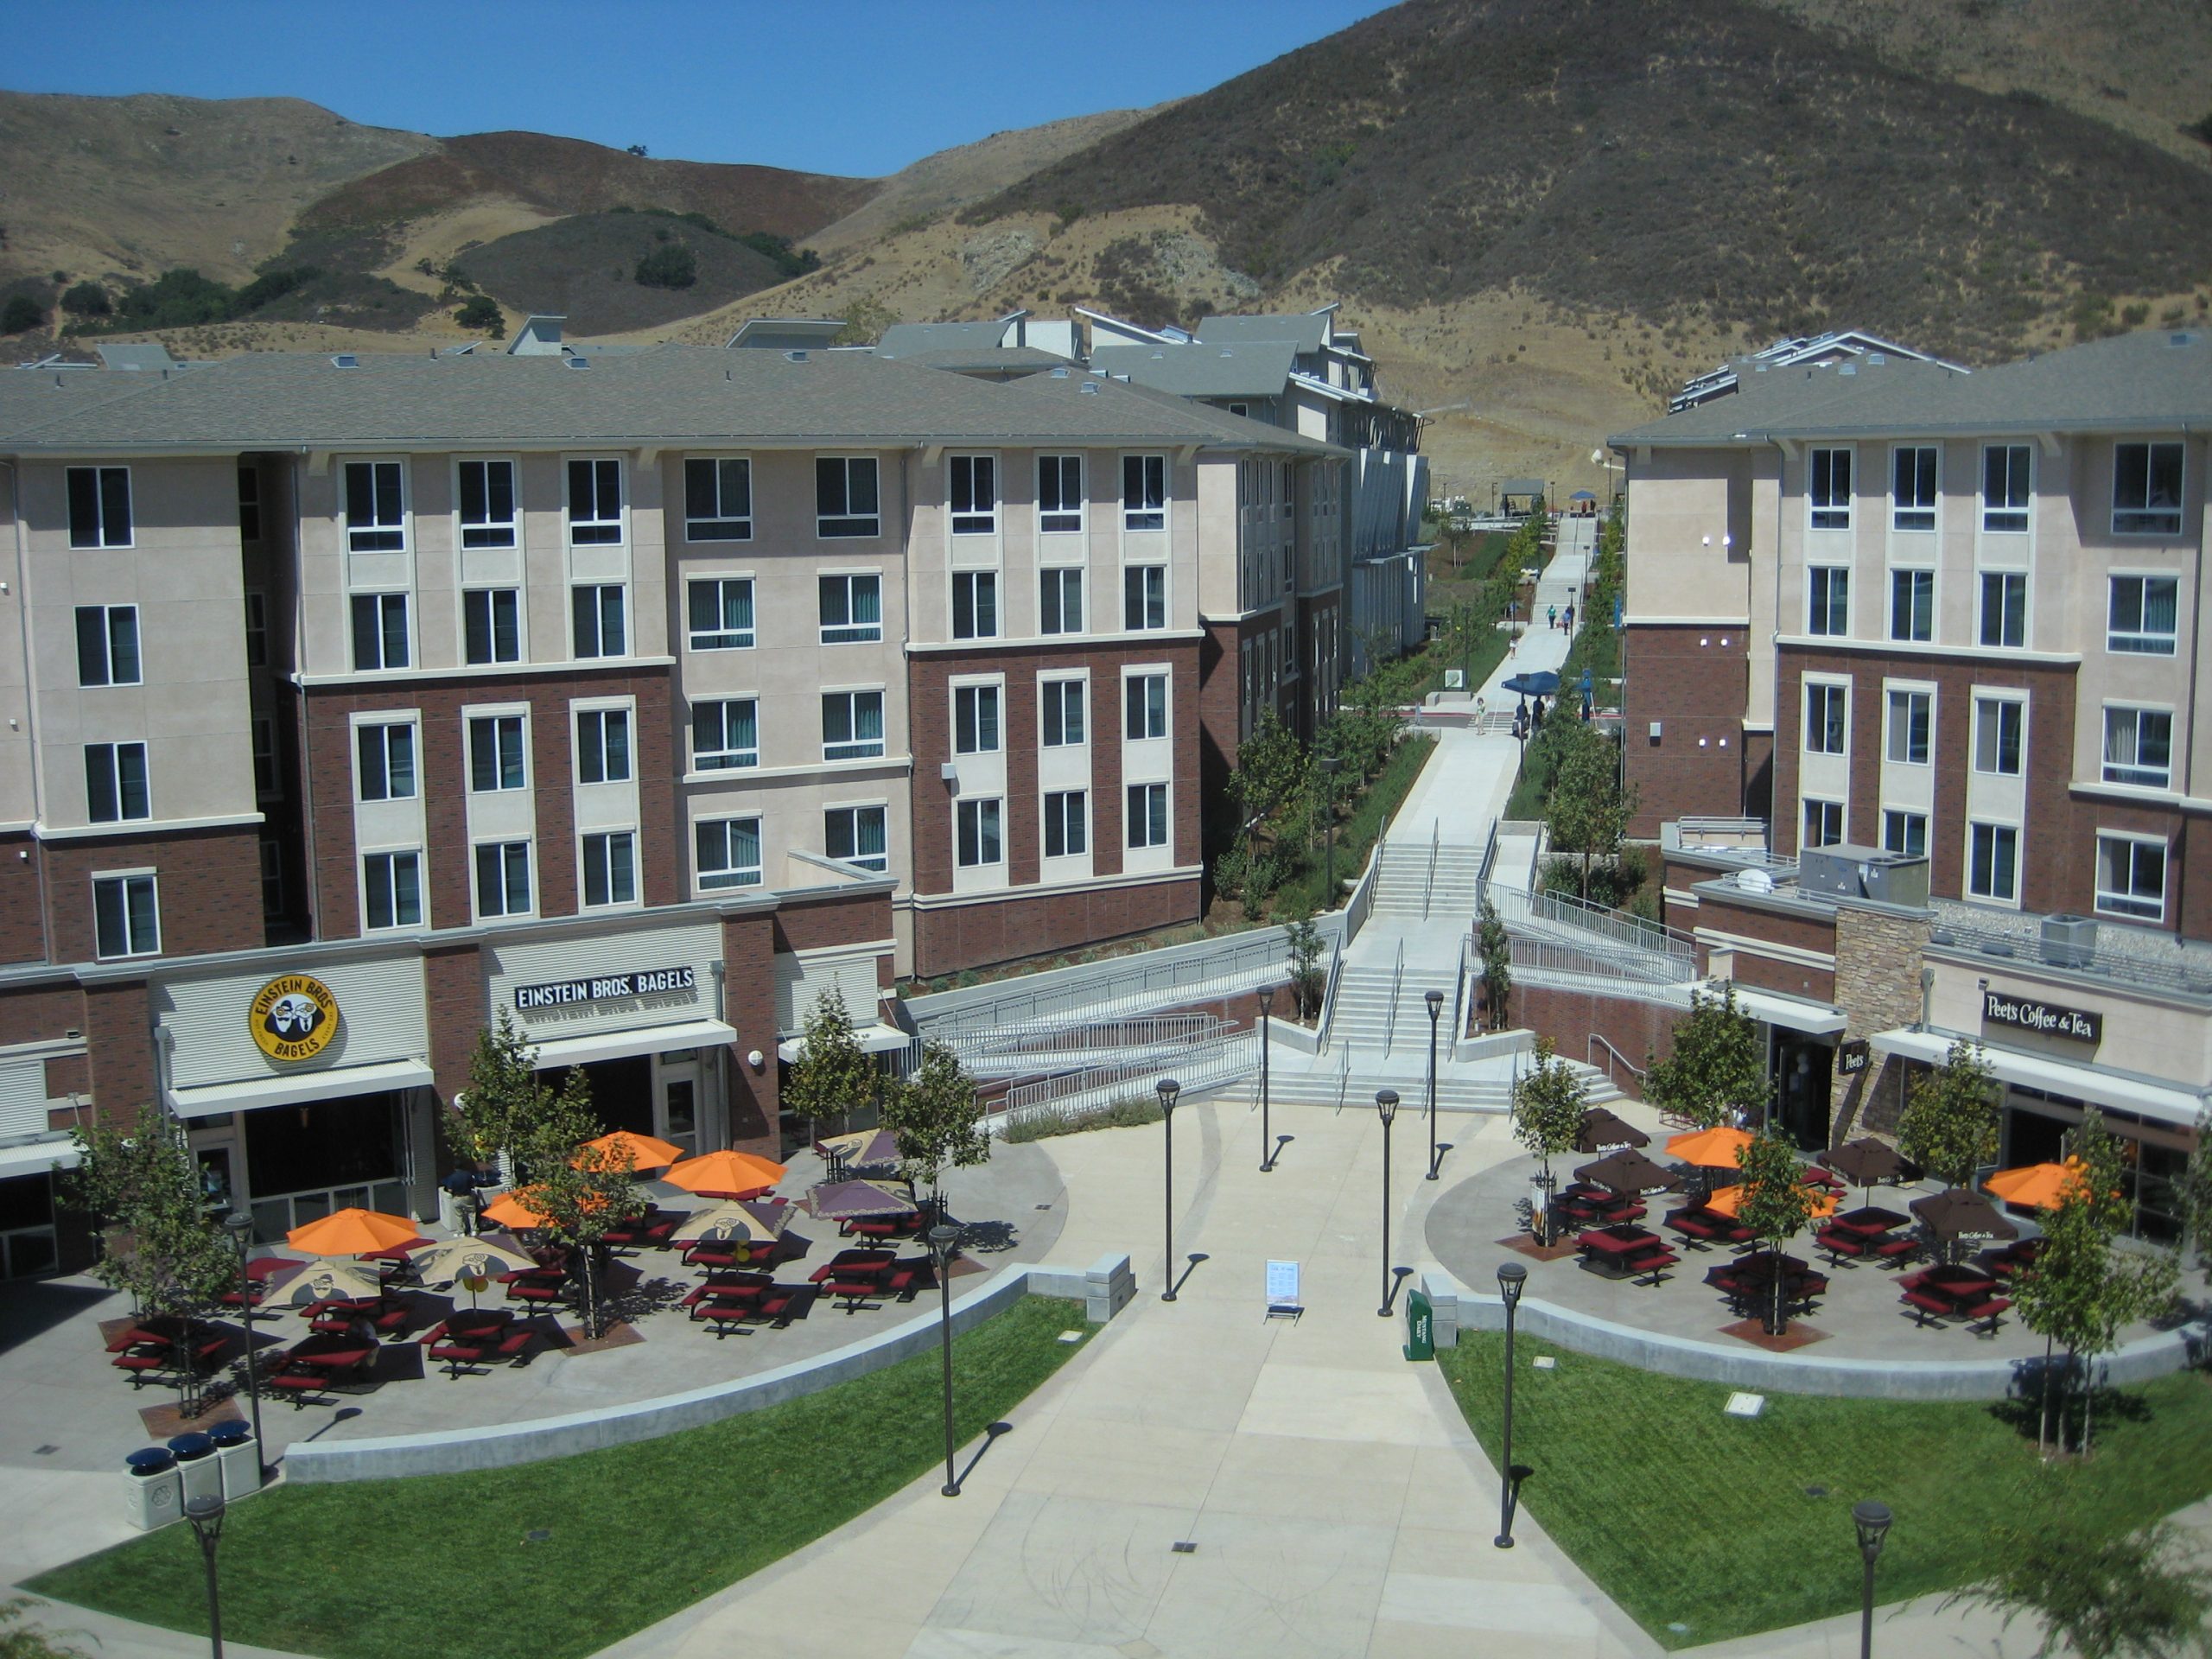 Conference & Event Planning, Cal Poly San Luis Obispo